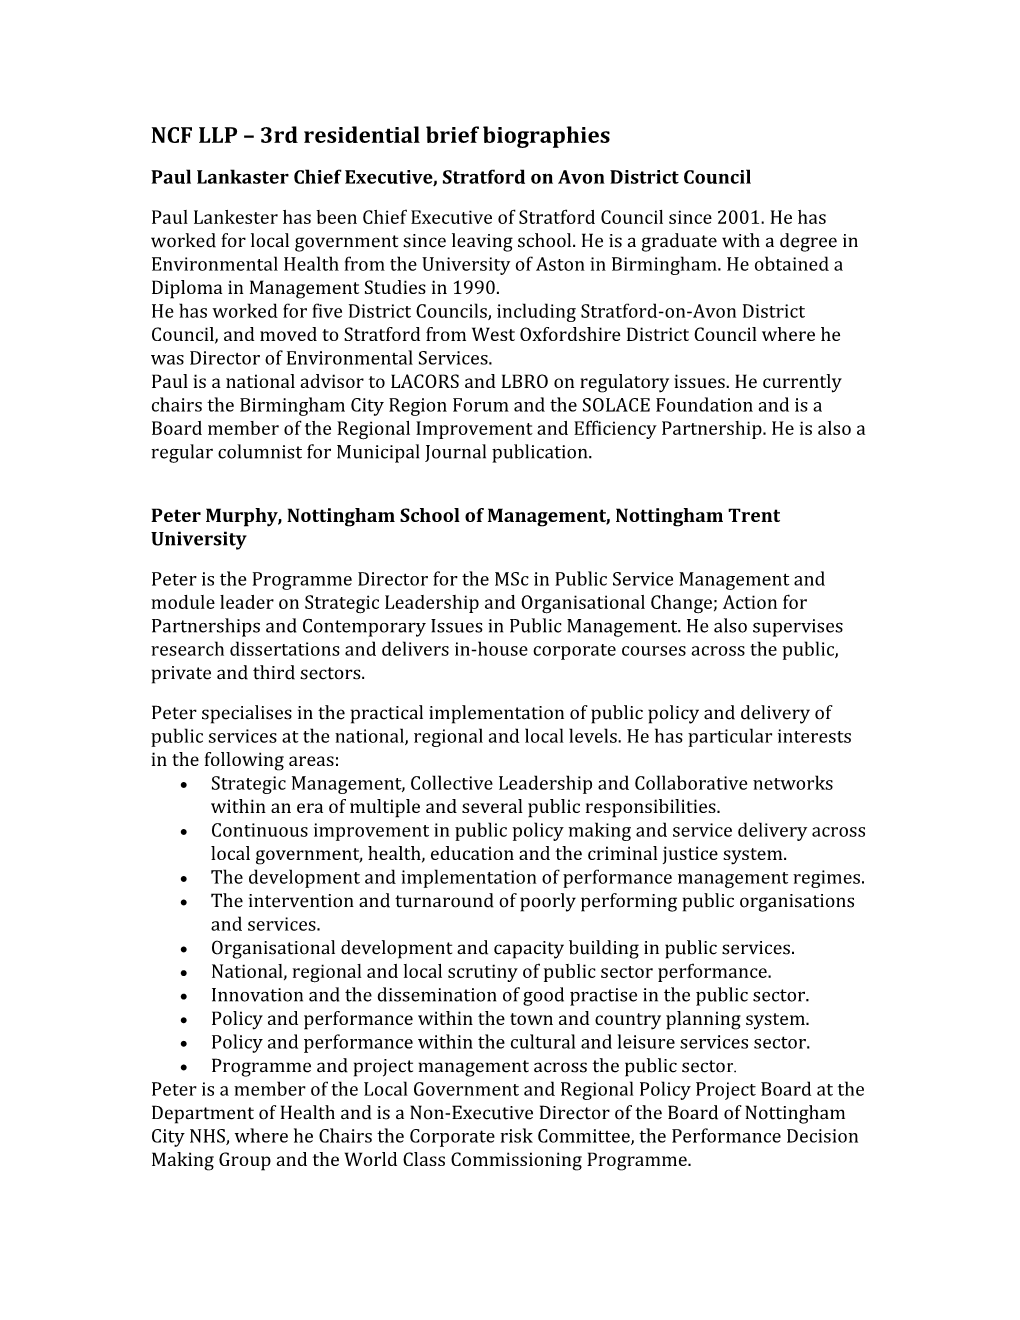 NCF LLP 3Rd Residential Brief Biographies